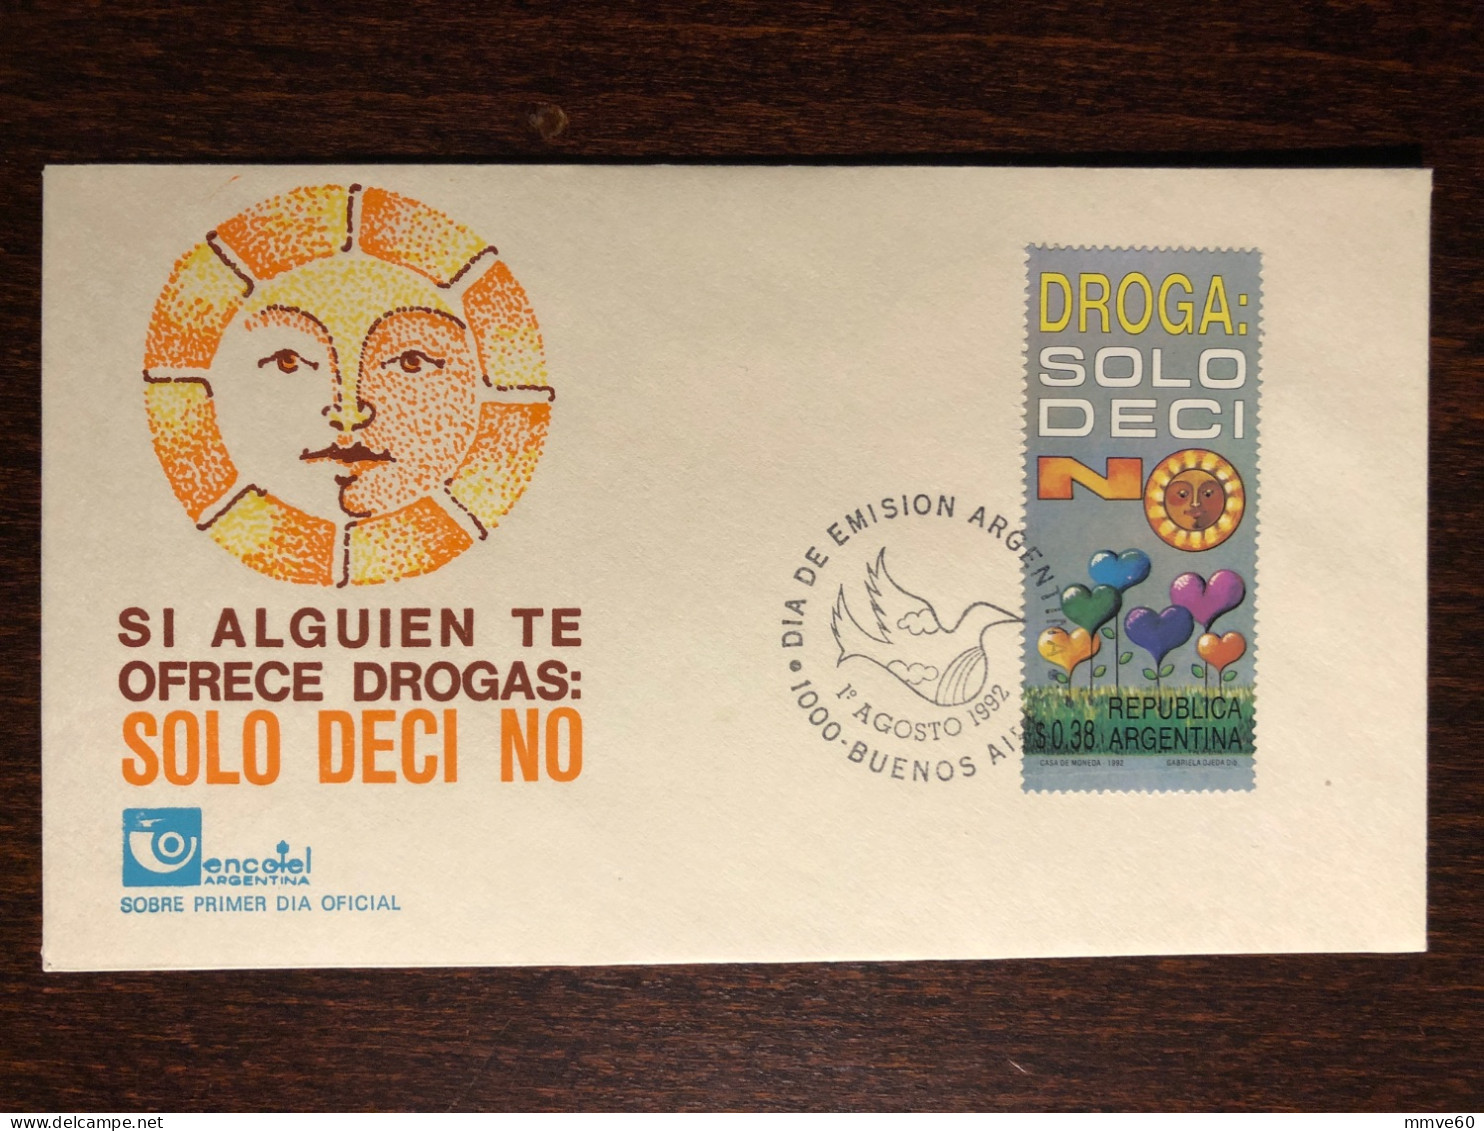 ARGENTINA FDC COVER 1992 YEAR NARCOTICS DRUGS HEALTH MEDICINE STAMPS - FDC